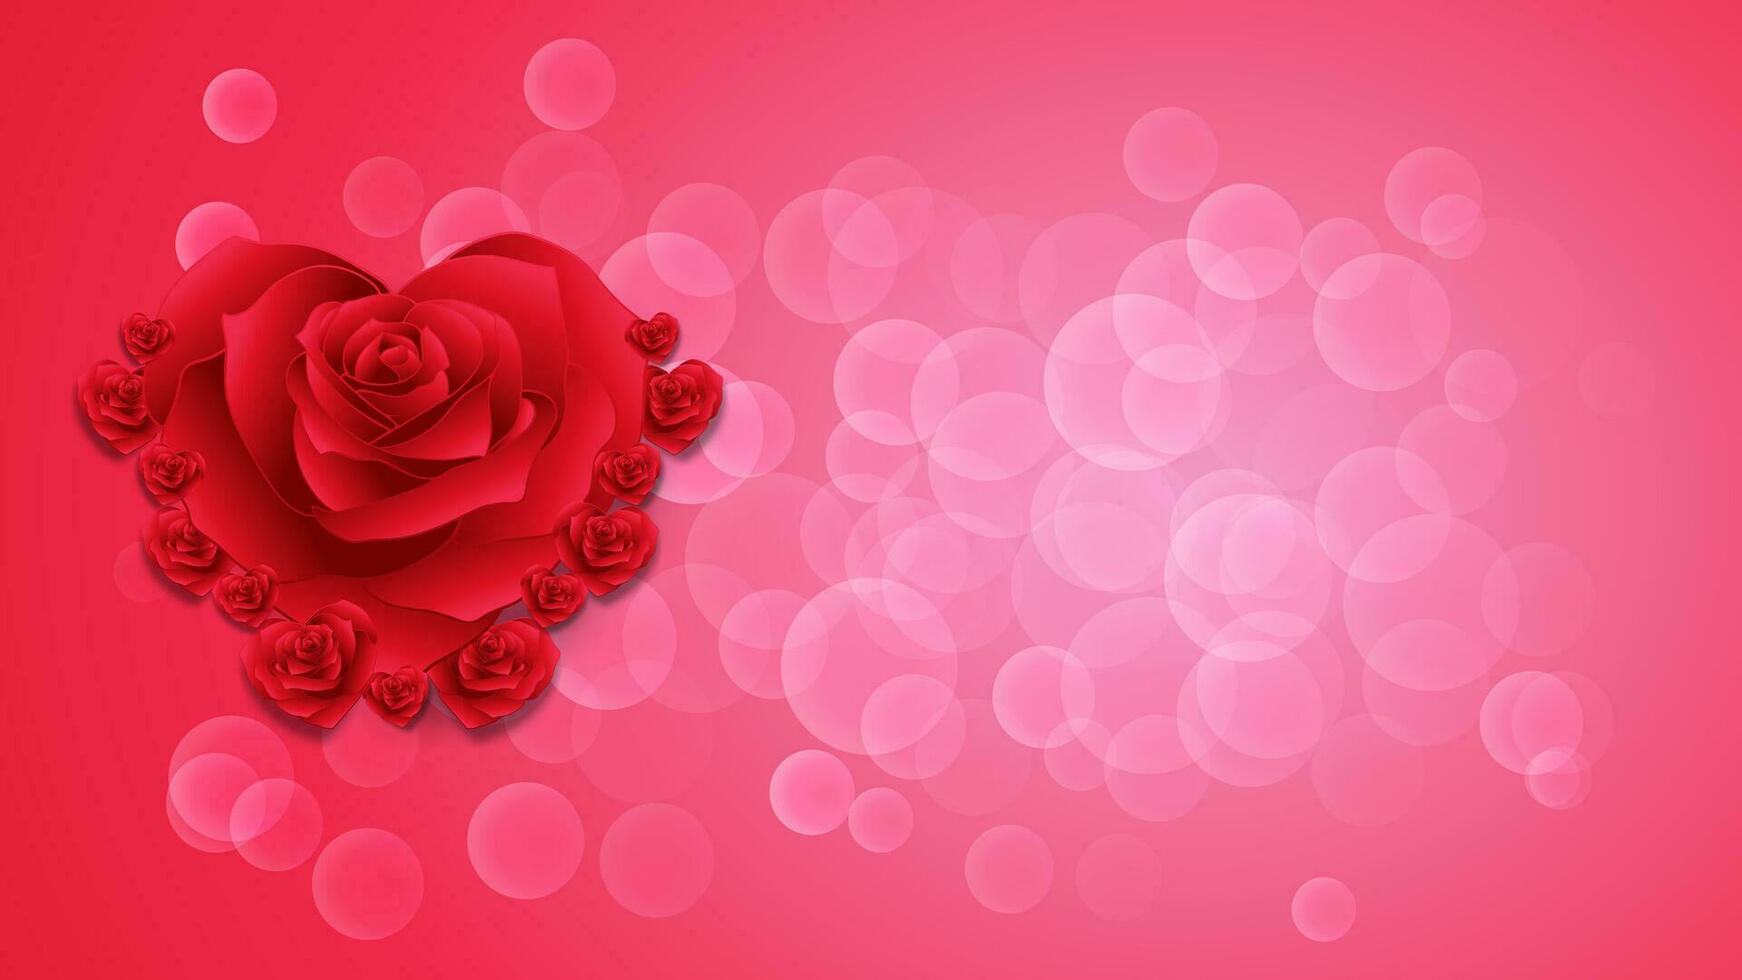 Valentine's day background with heart shaped flowers vector